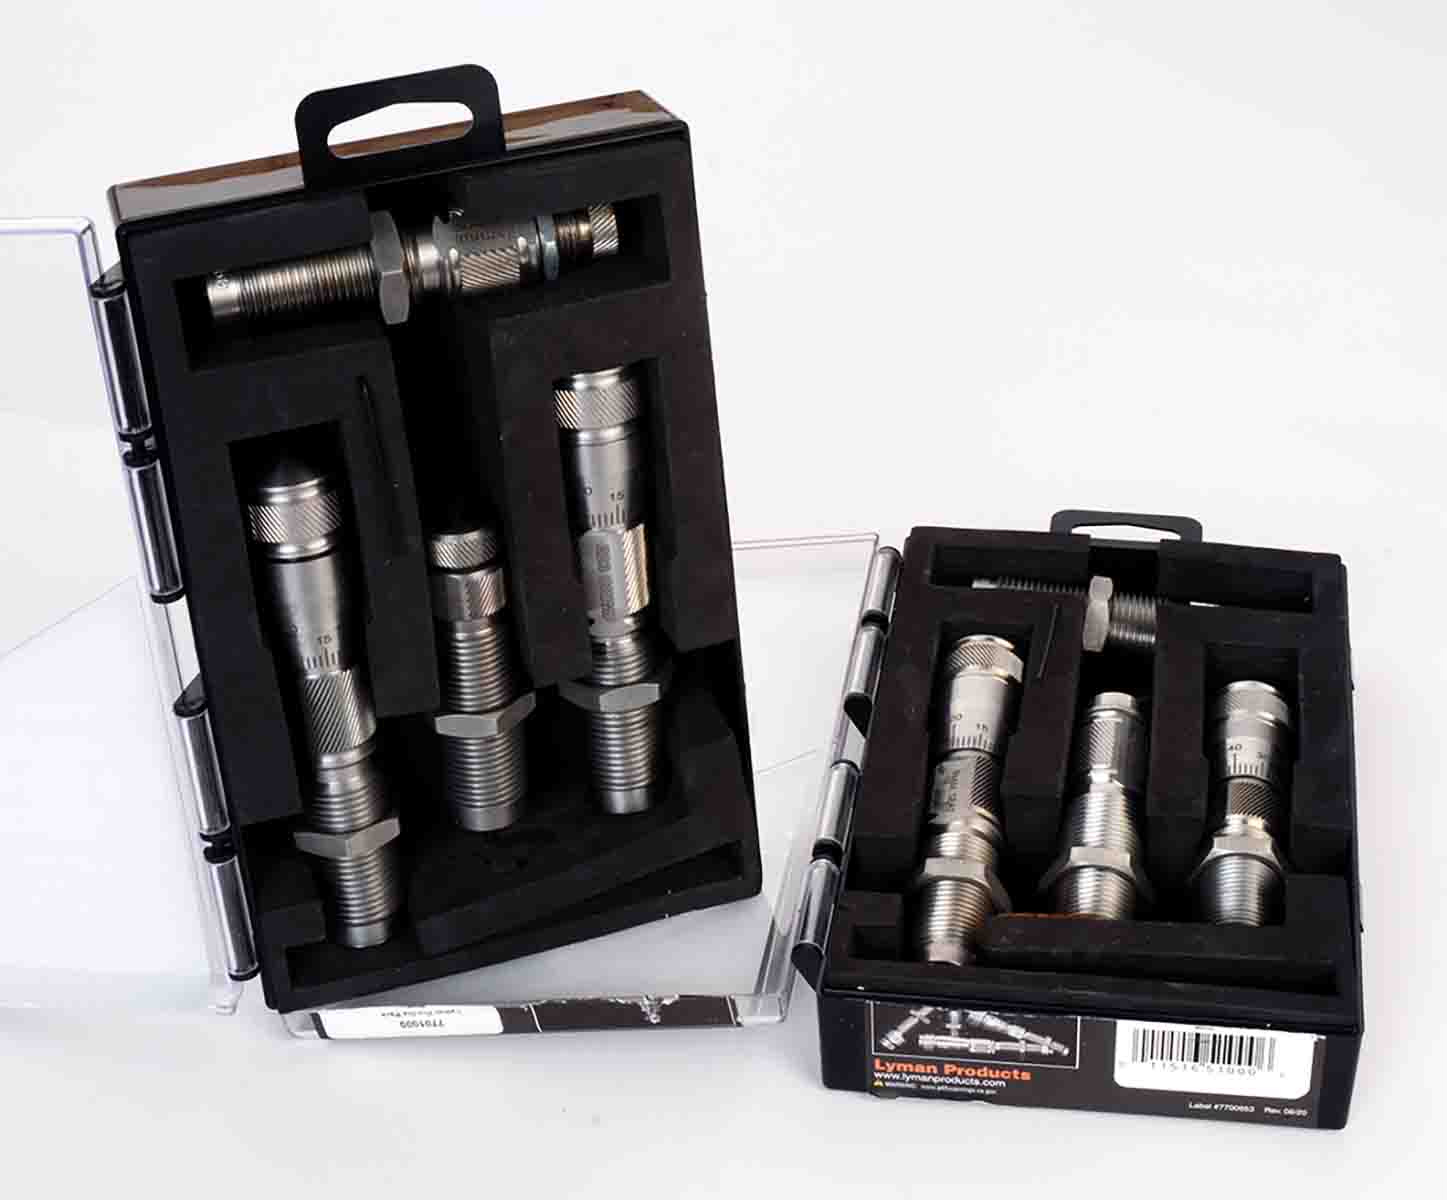 Mike used Lyman’s new stainless steel Pro-Die 9mm set for all reloading for this article. The set includes a taper-crimp die.